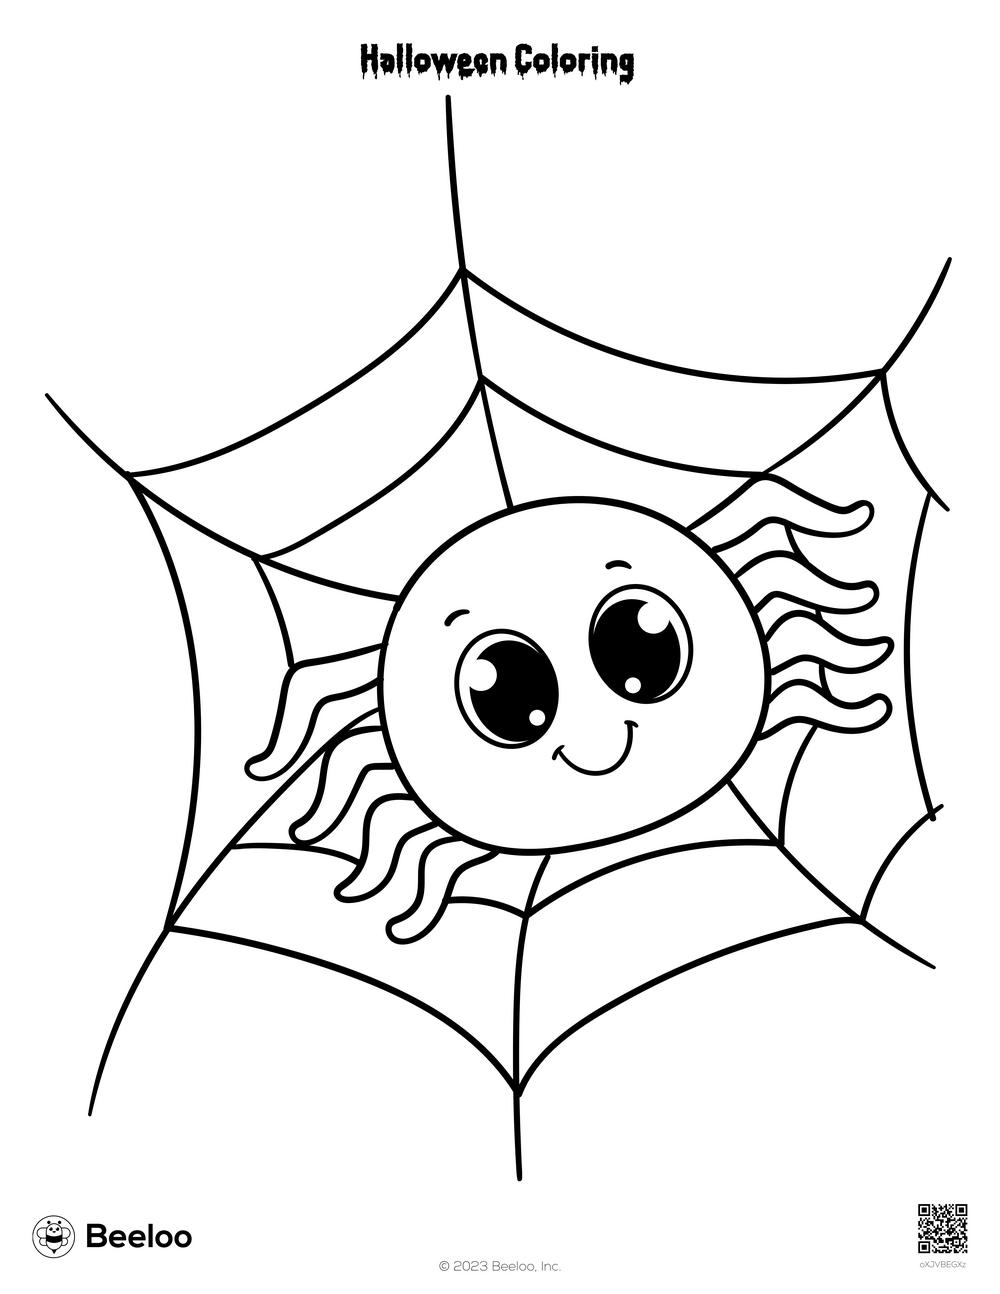 Halloween coloring â printable crafts and activities for kids